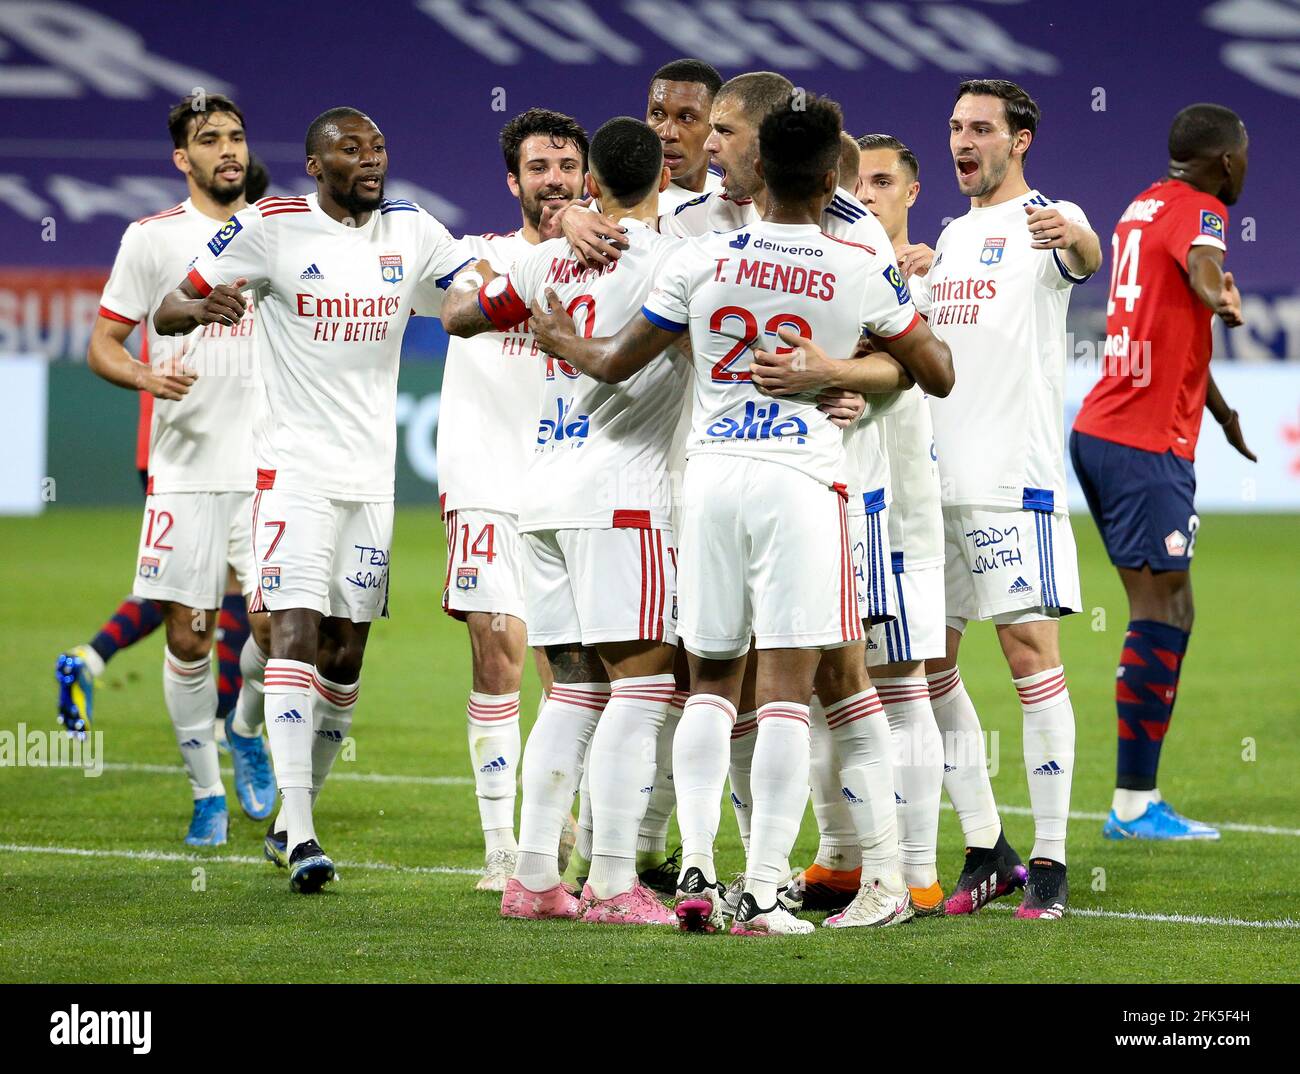 Players of Lyon celebrate their second goal during the French championship  Ligue 1 football match between Olympique Lyonnais (OL) and Lille OSC (LOSC)  on April 25, 2021 at Groupama Stadium in Decines